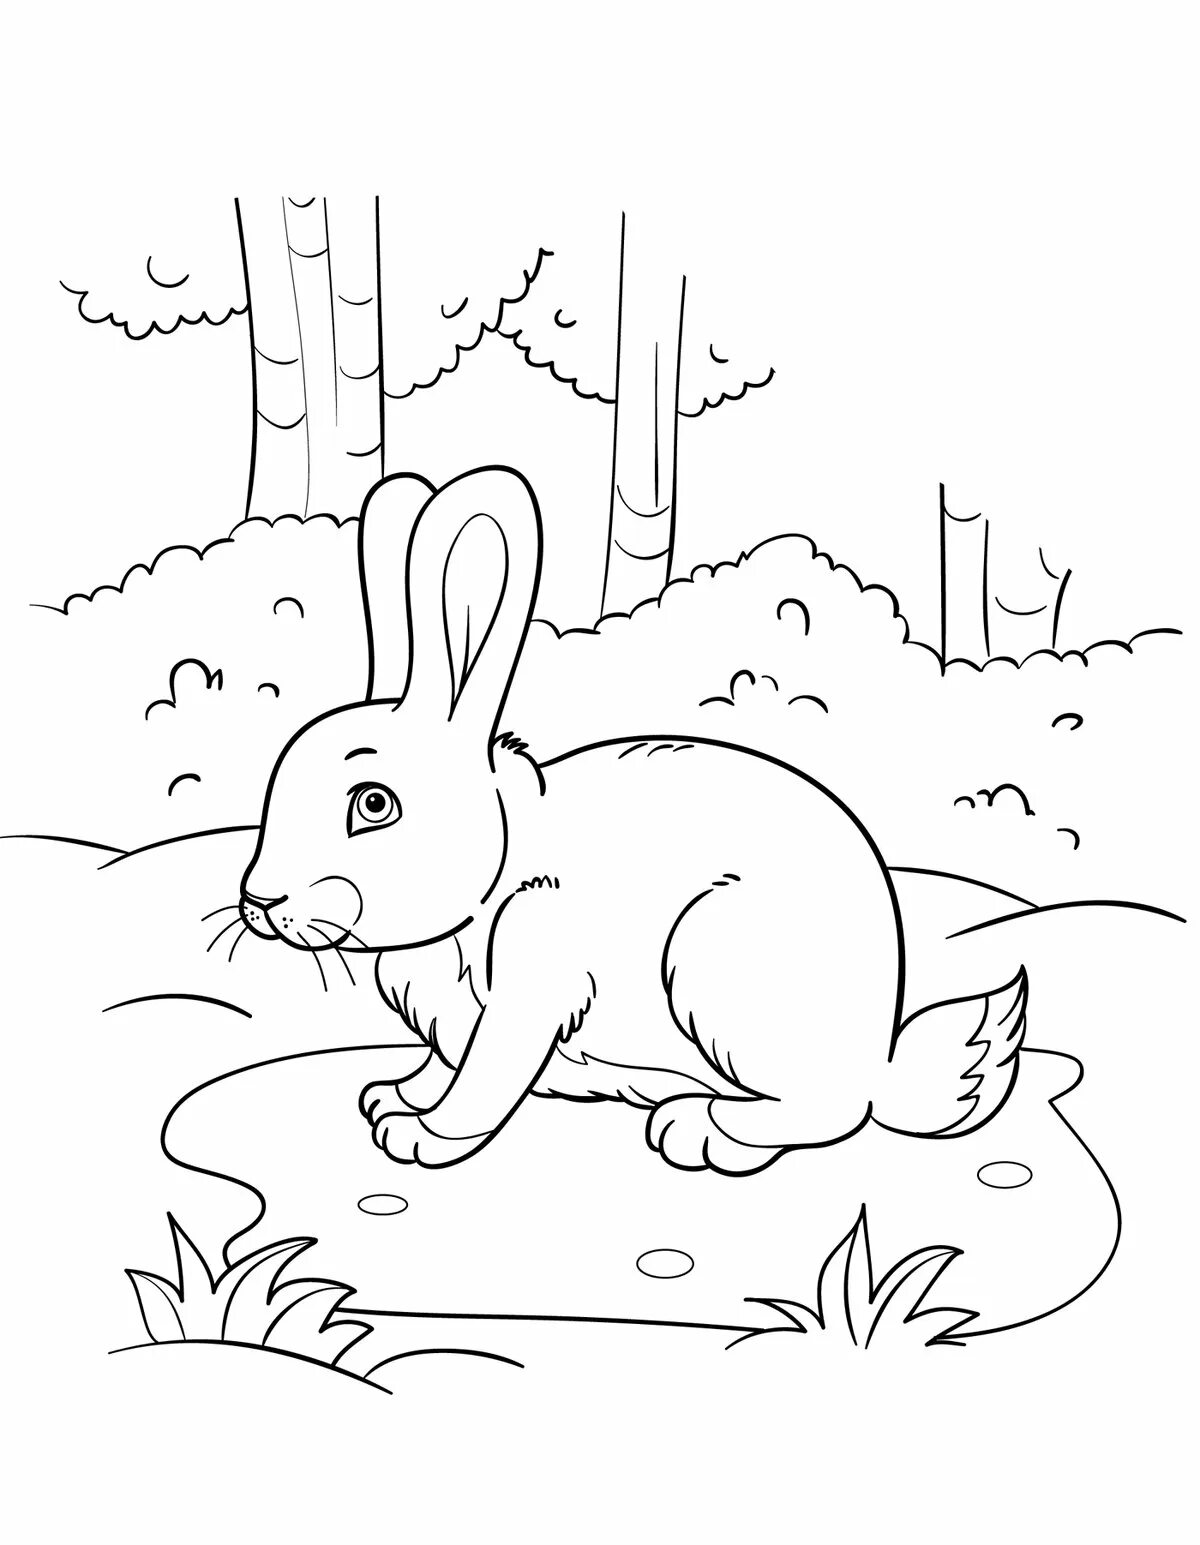 Bunny in the forest #7